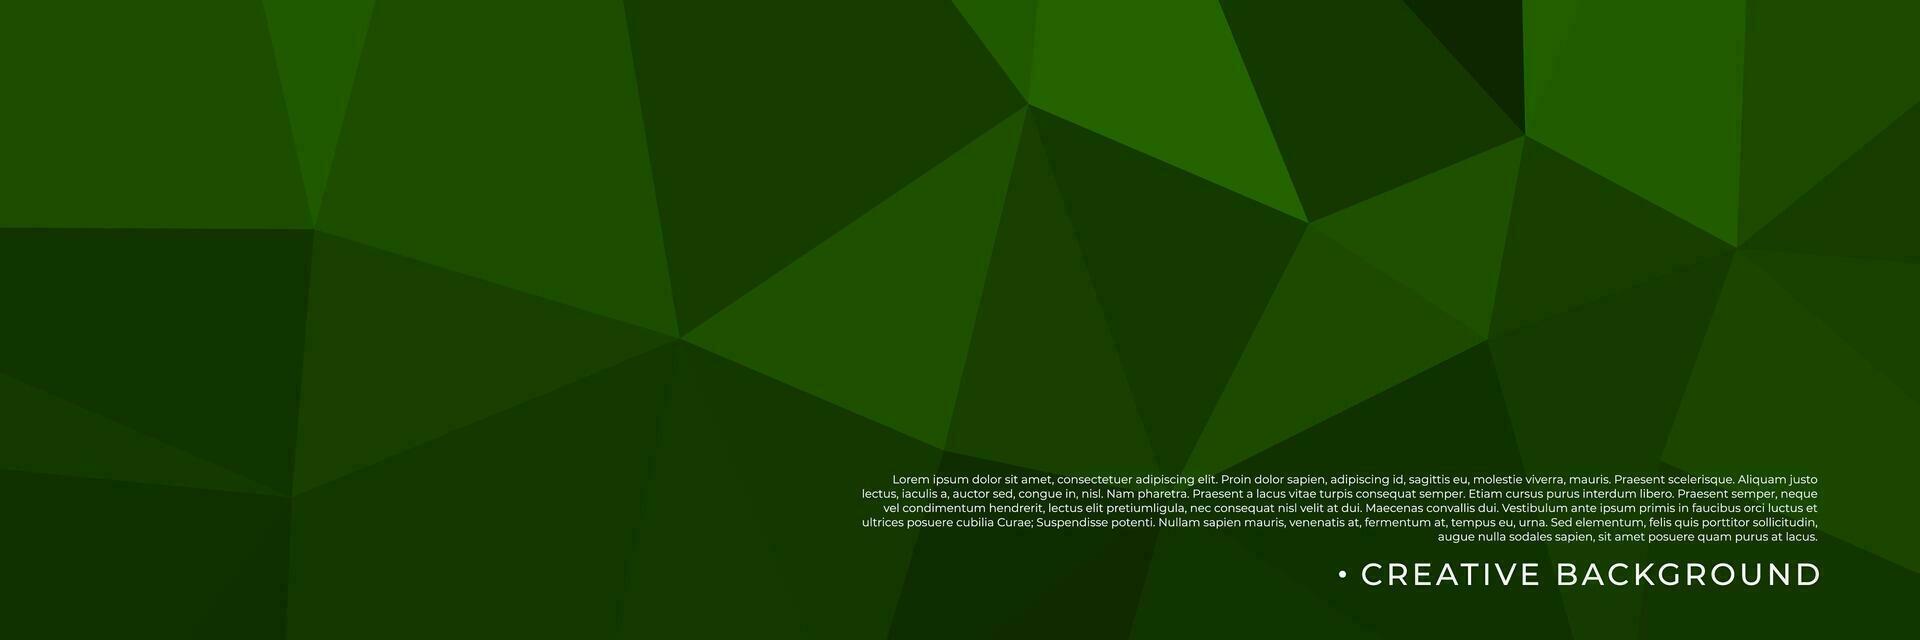 abstract green triangles background for design template vector